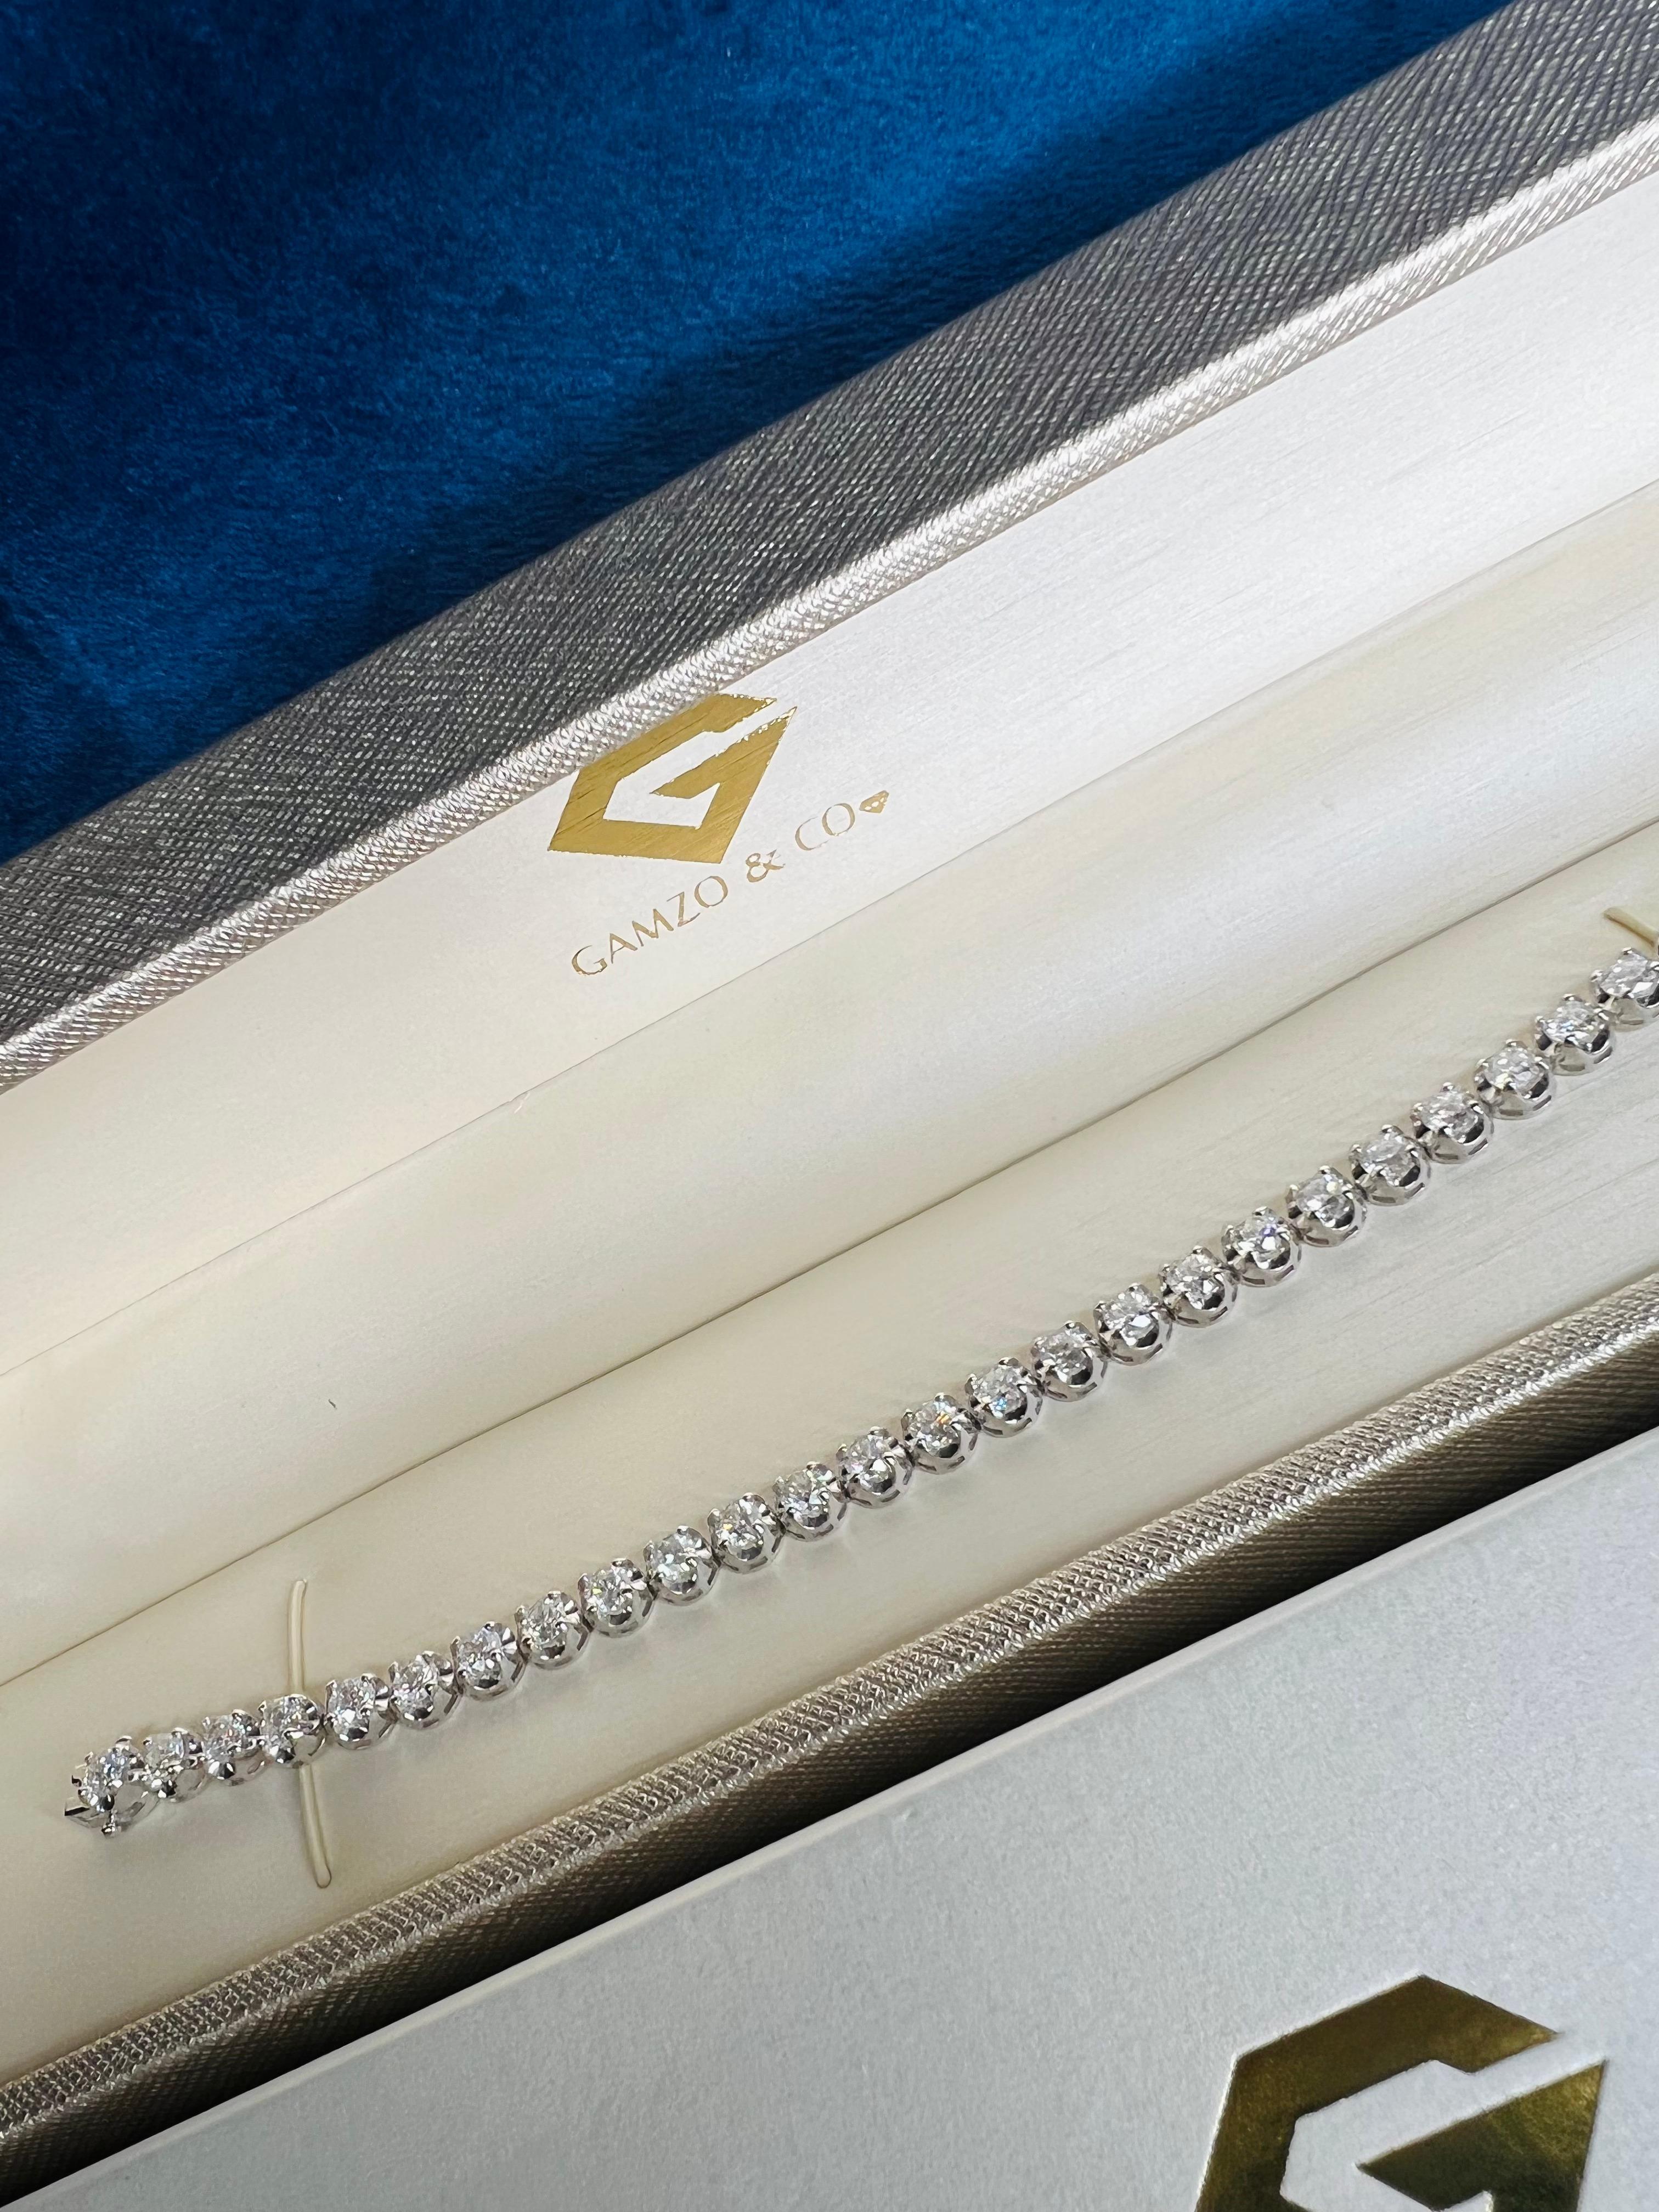 These beautiful round diamonds dance around your wrist as they absorb light and attention.
Metal: 14k Gold
Diamond Cut: Round
Diamond Total Carats: 7ct
Diamond Clarity: VS
Diamond Color: F
Color: White Gold
Bracelet Length: 6 Inches 
Included with